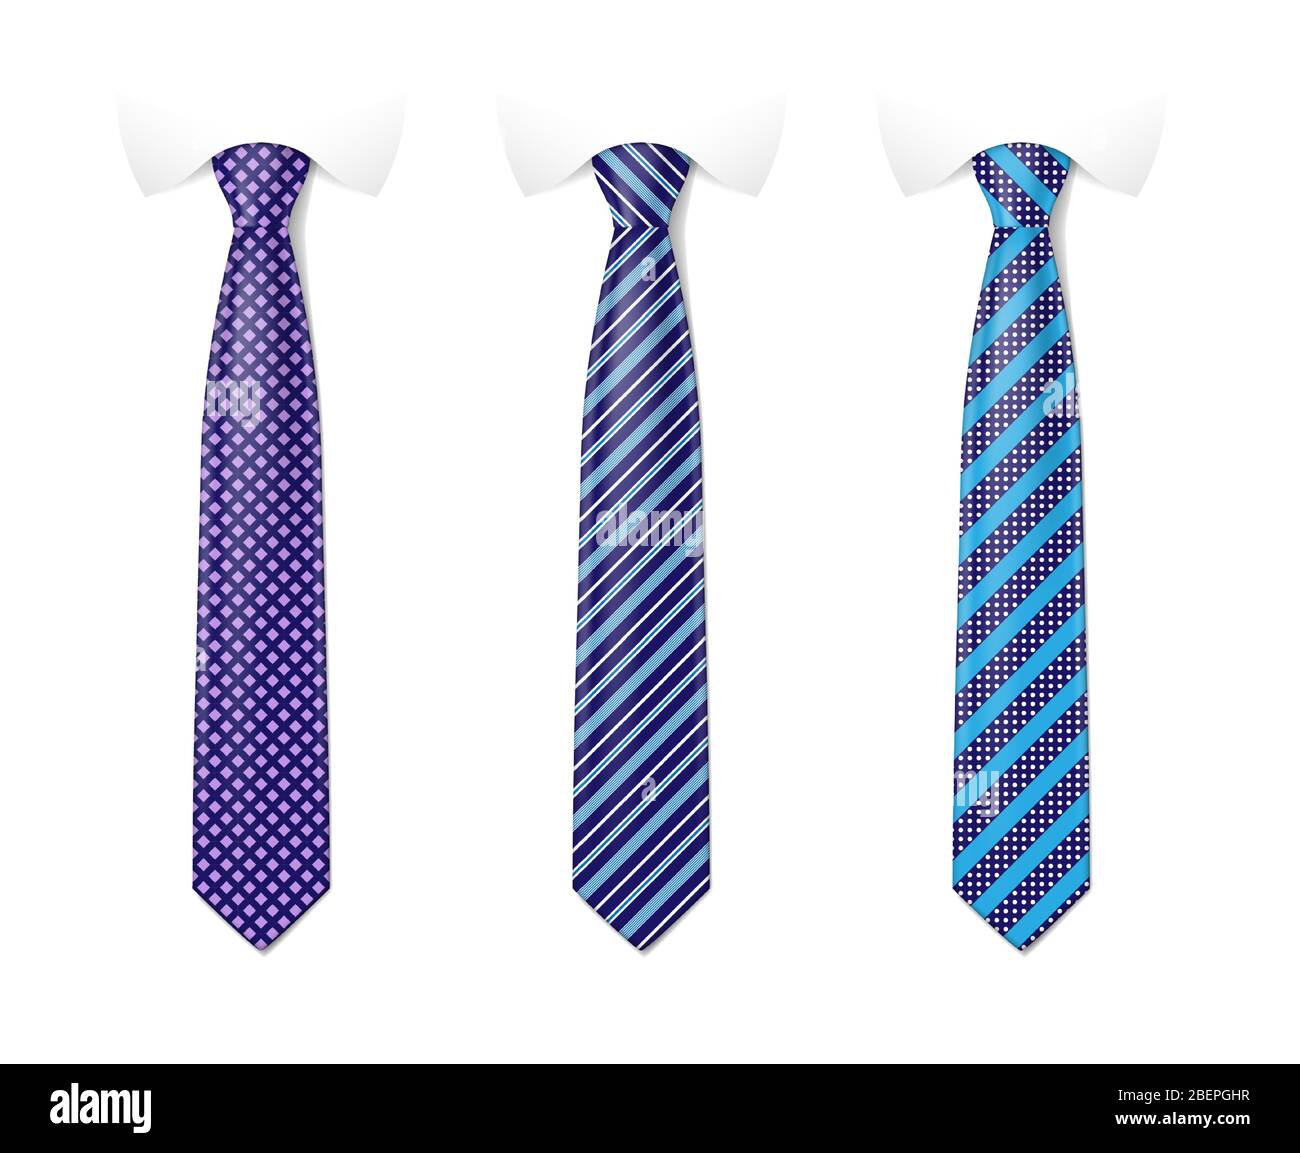 Download Man Colored Tie Set Tie Mockup With Different Fashion Pattern Striped Silk Neckties Templates With Textures Set Vector Illustration Stock Vector Image Art Alamy